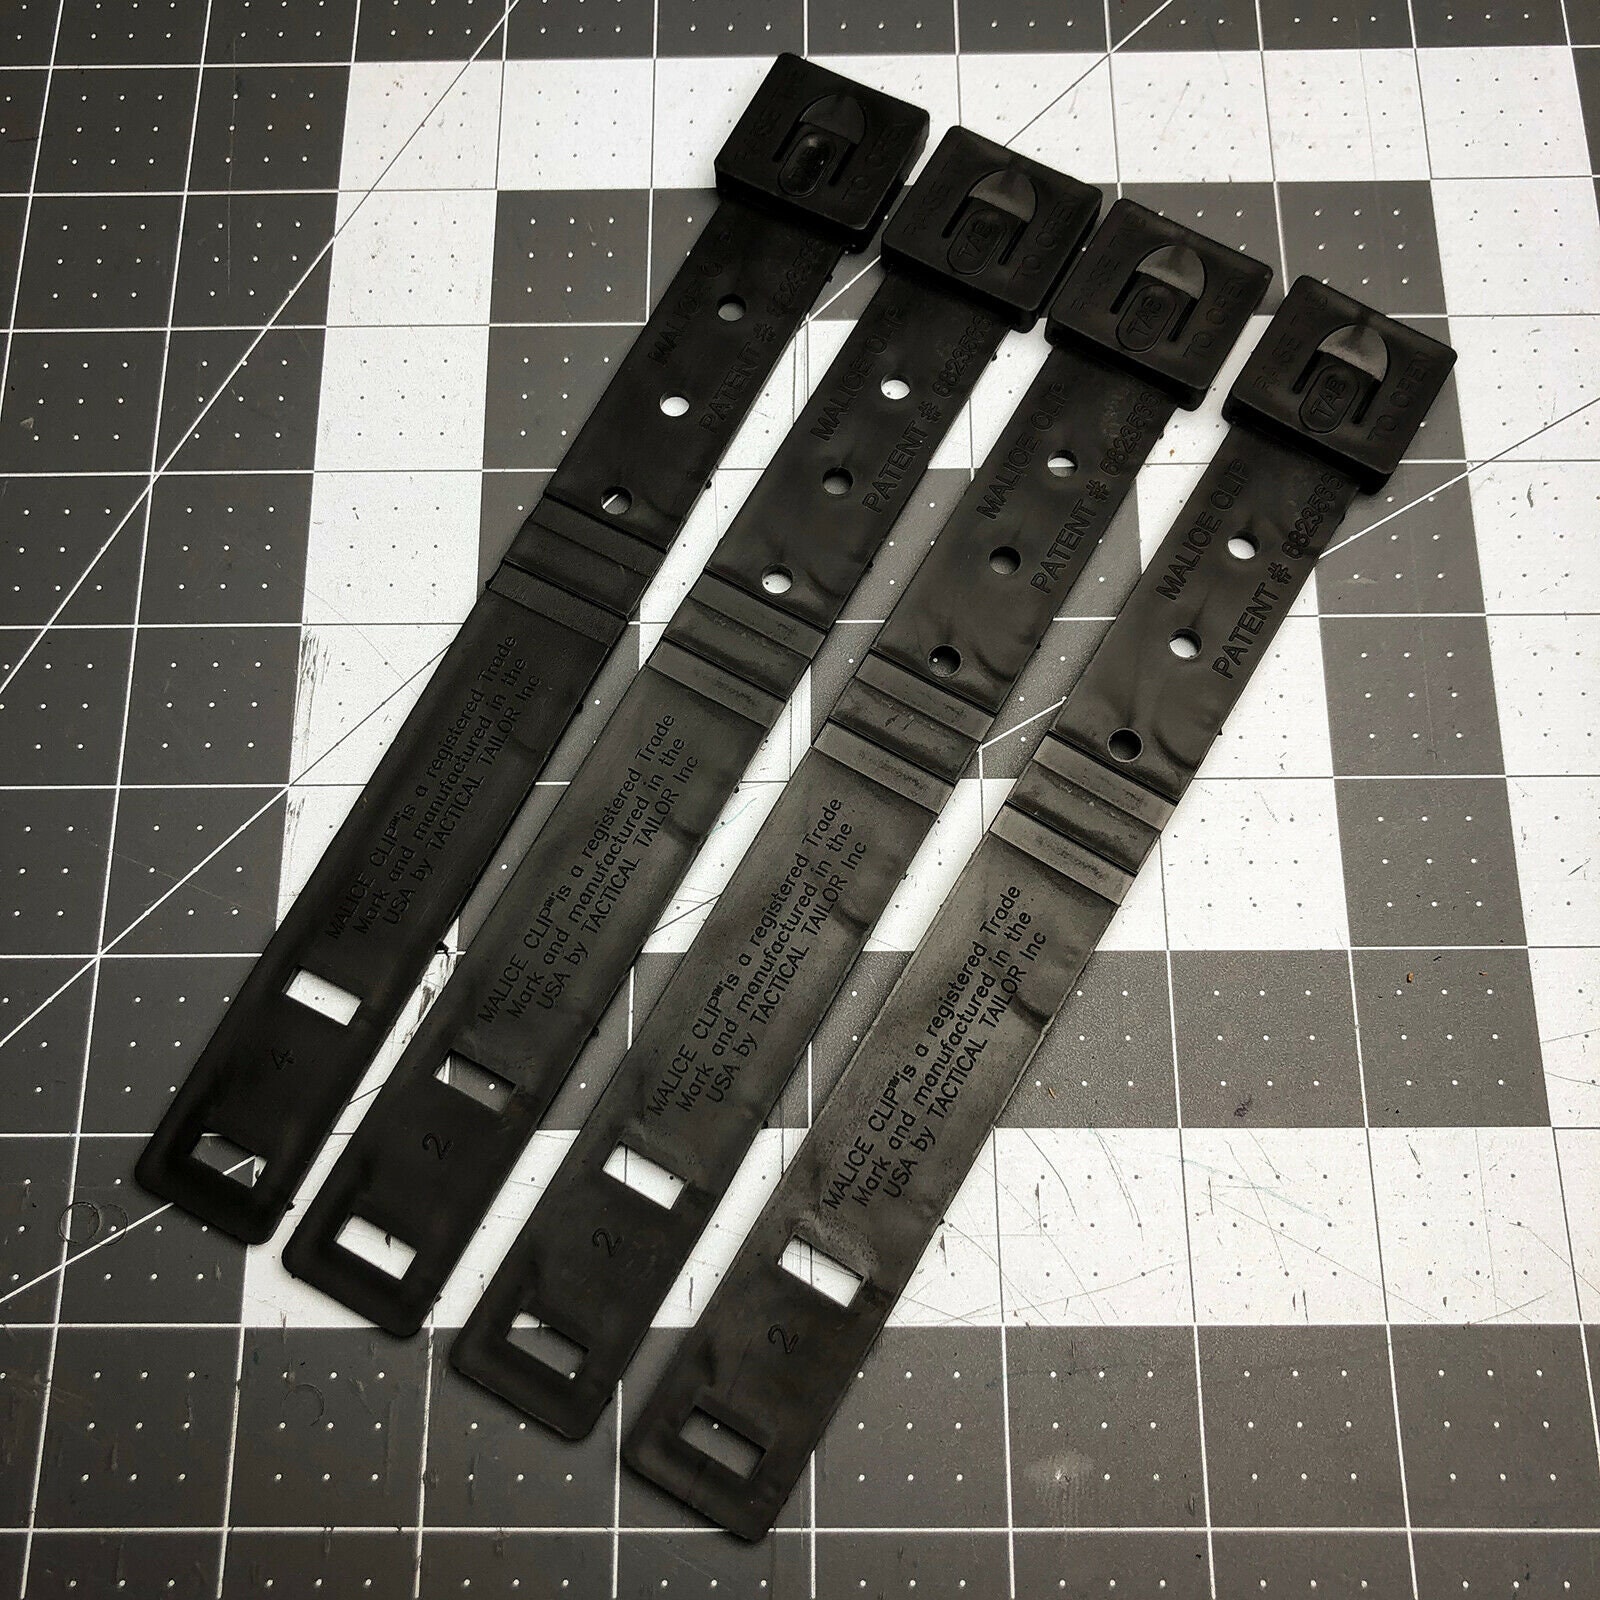 Tactical Tailor Malice Clips Available in Black or Coyote Pack of 4 Short